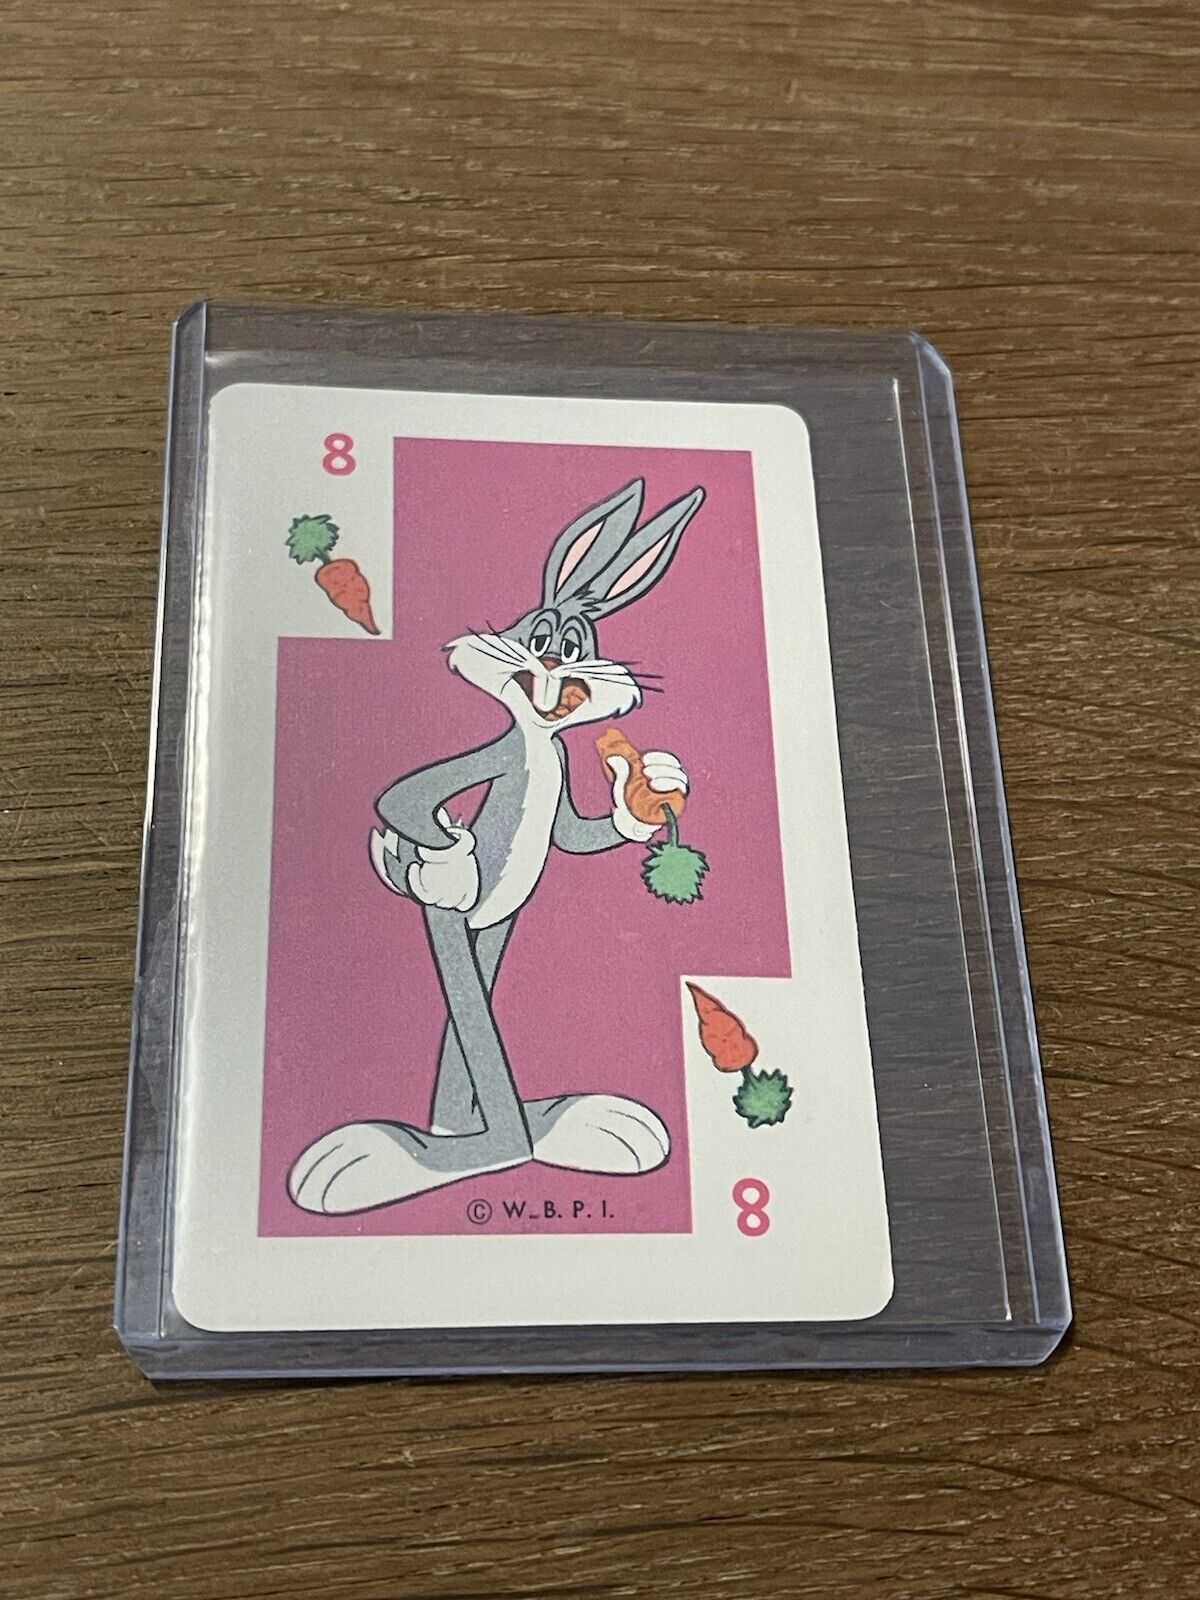 1966 WARNER BROS. PICTURES WHITMAN BUGS BUNNY CARD GAME PLAYING CARD RARE